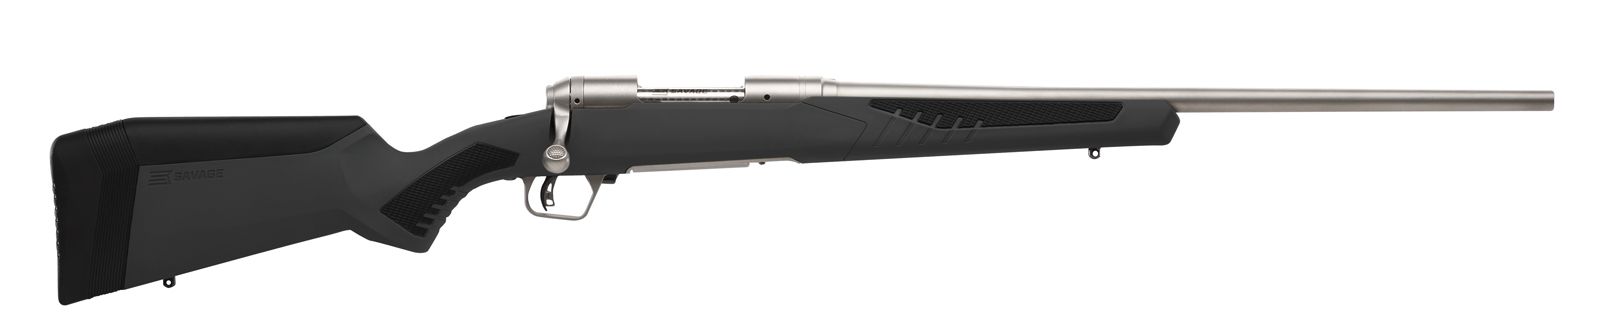 The new Savage Arms Model 110 Storm with AccuFit is the replacement for the previous Model 16/116 Weather Warrior line.